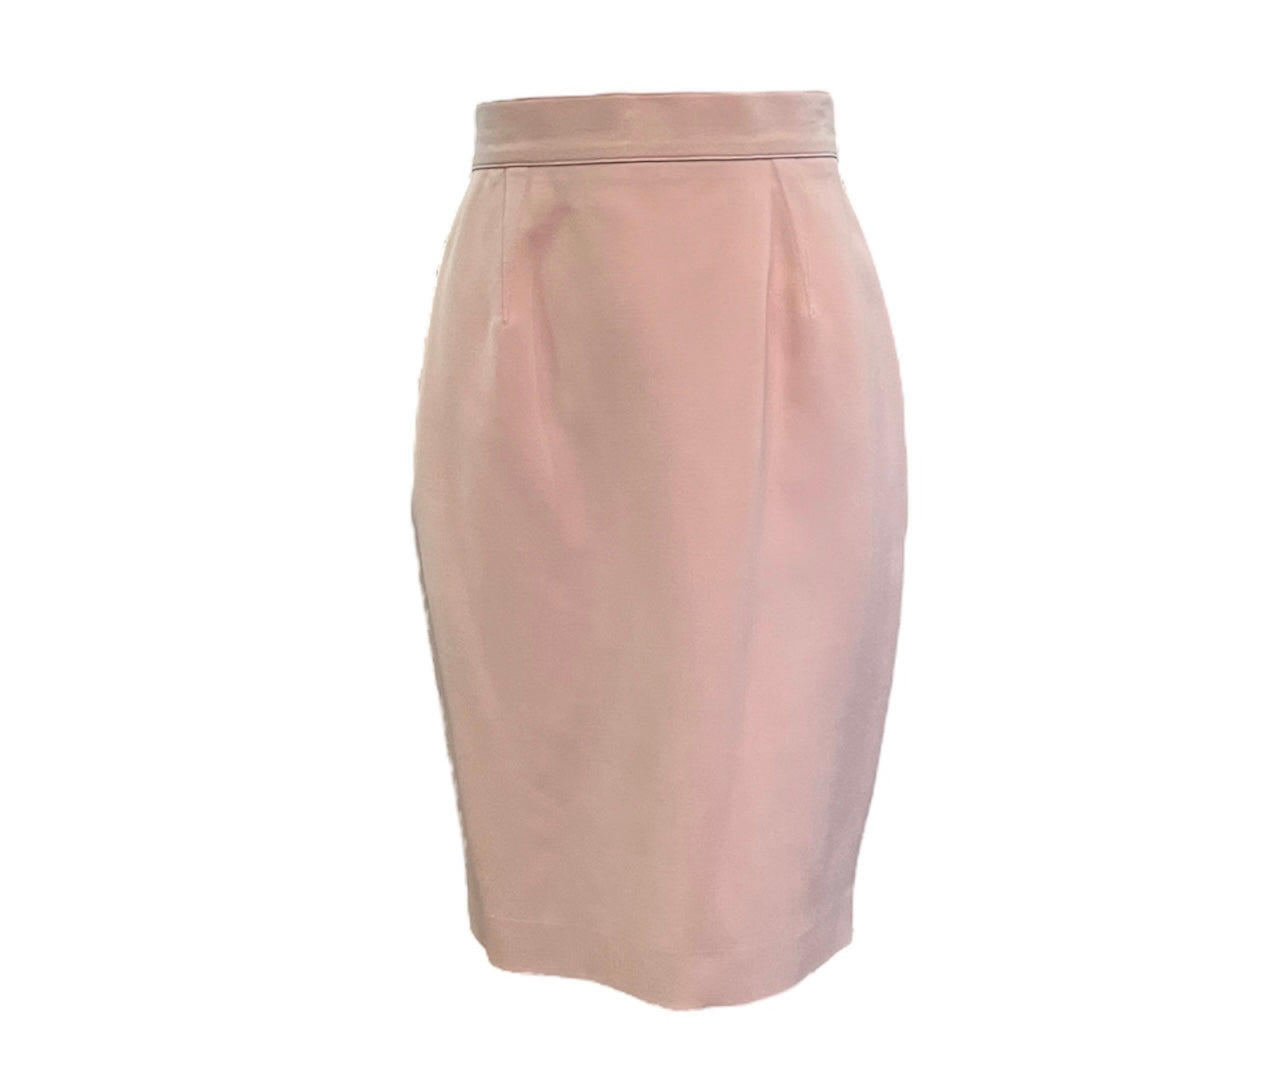 Thierry Mugler 90s Dusty Pink Skirt Suit SKIRT FRONT 6 of 8